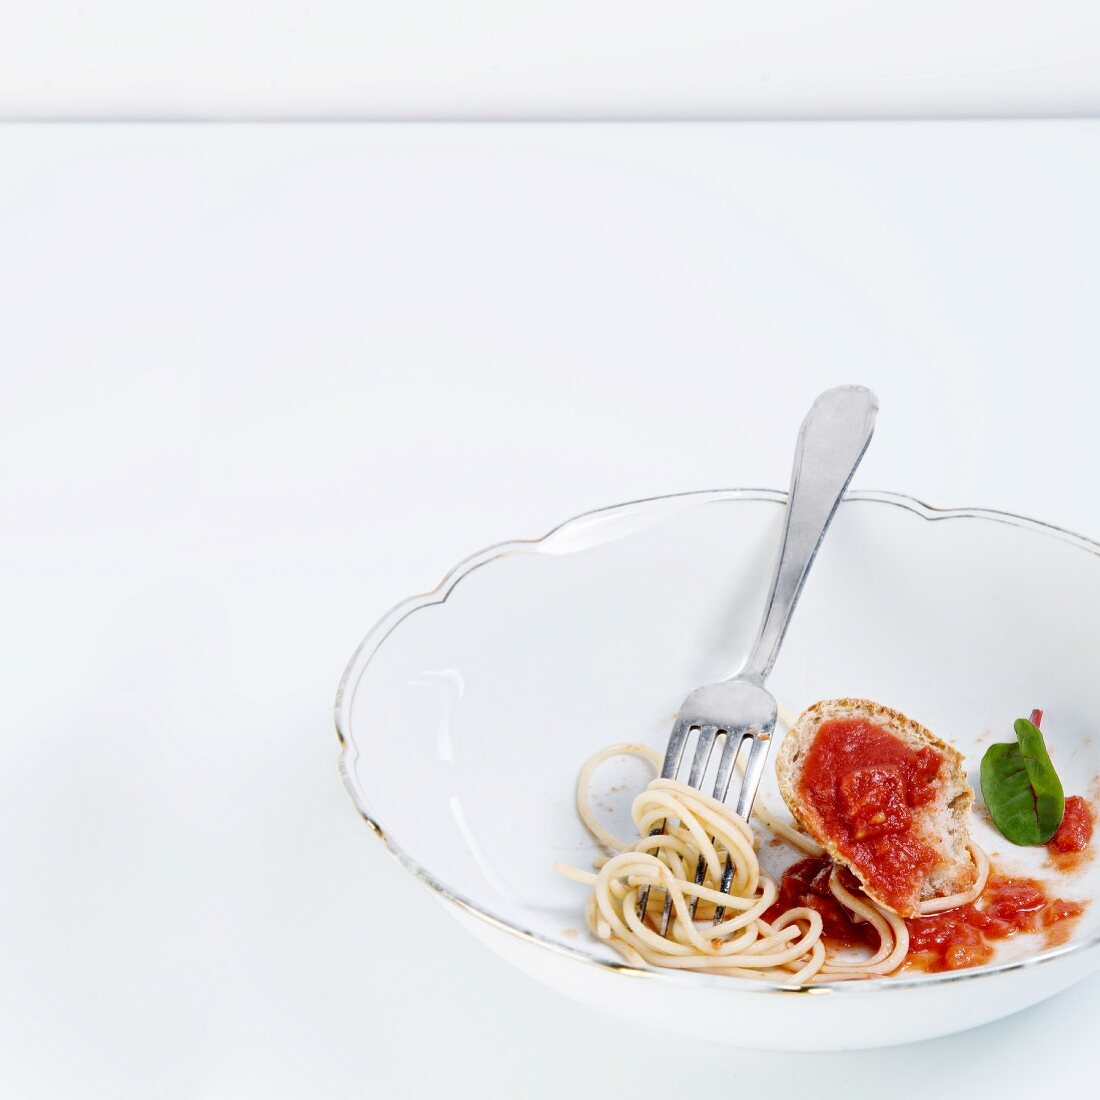 Spaghetti with tomato ragout and baguette